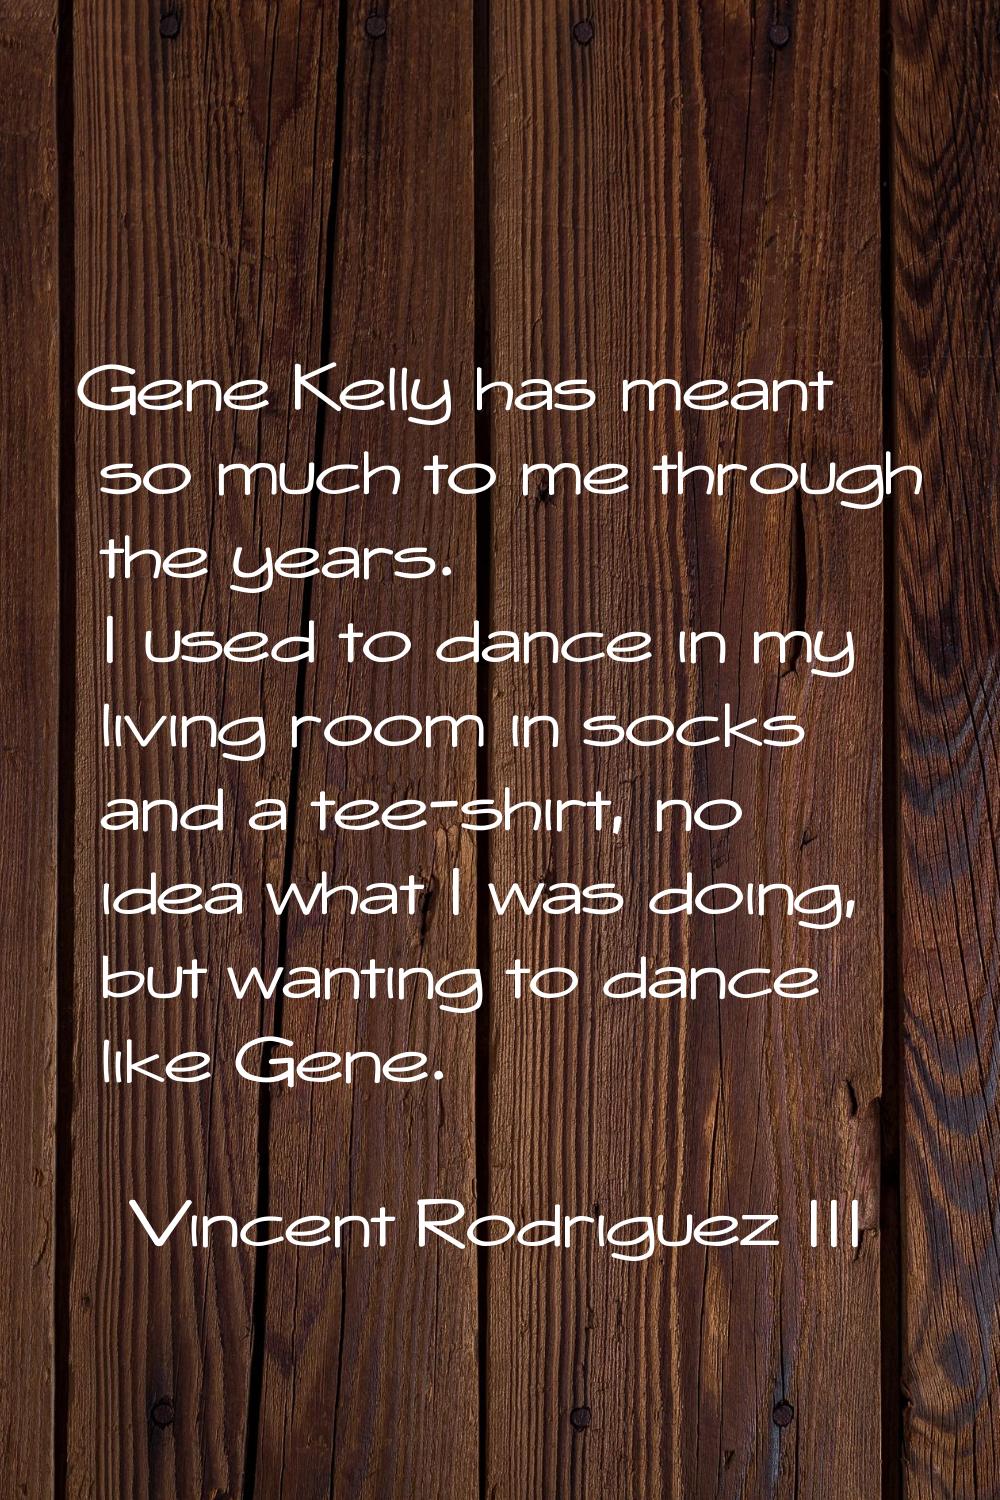 Gene Kelly has meant so much to me through the years. I used to dance in my living room in socks an